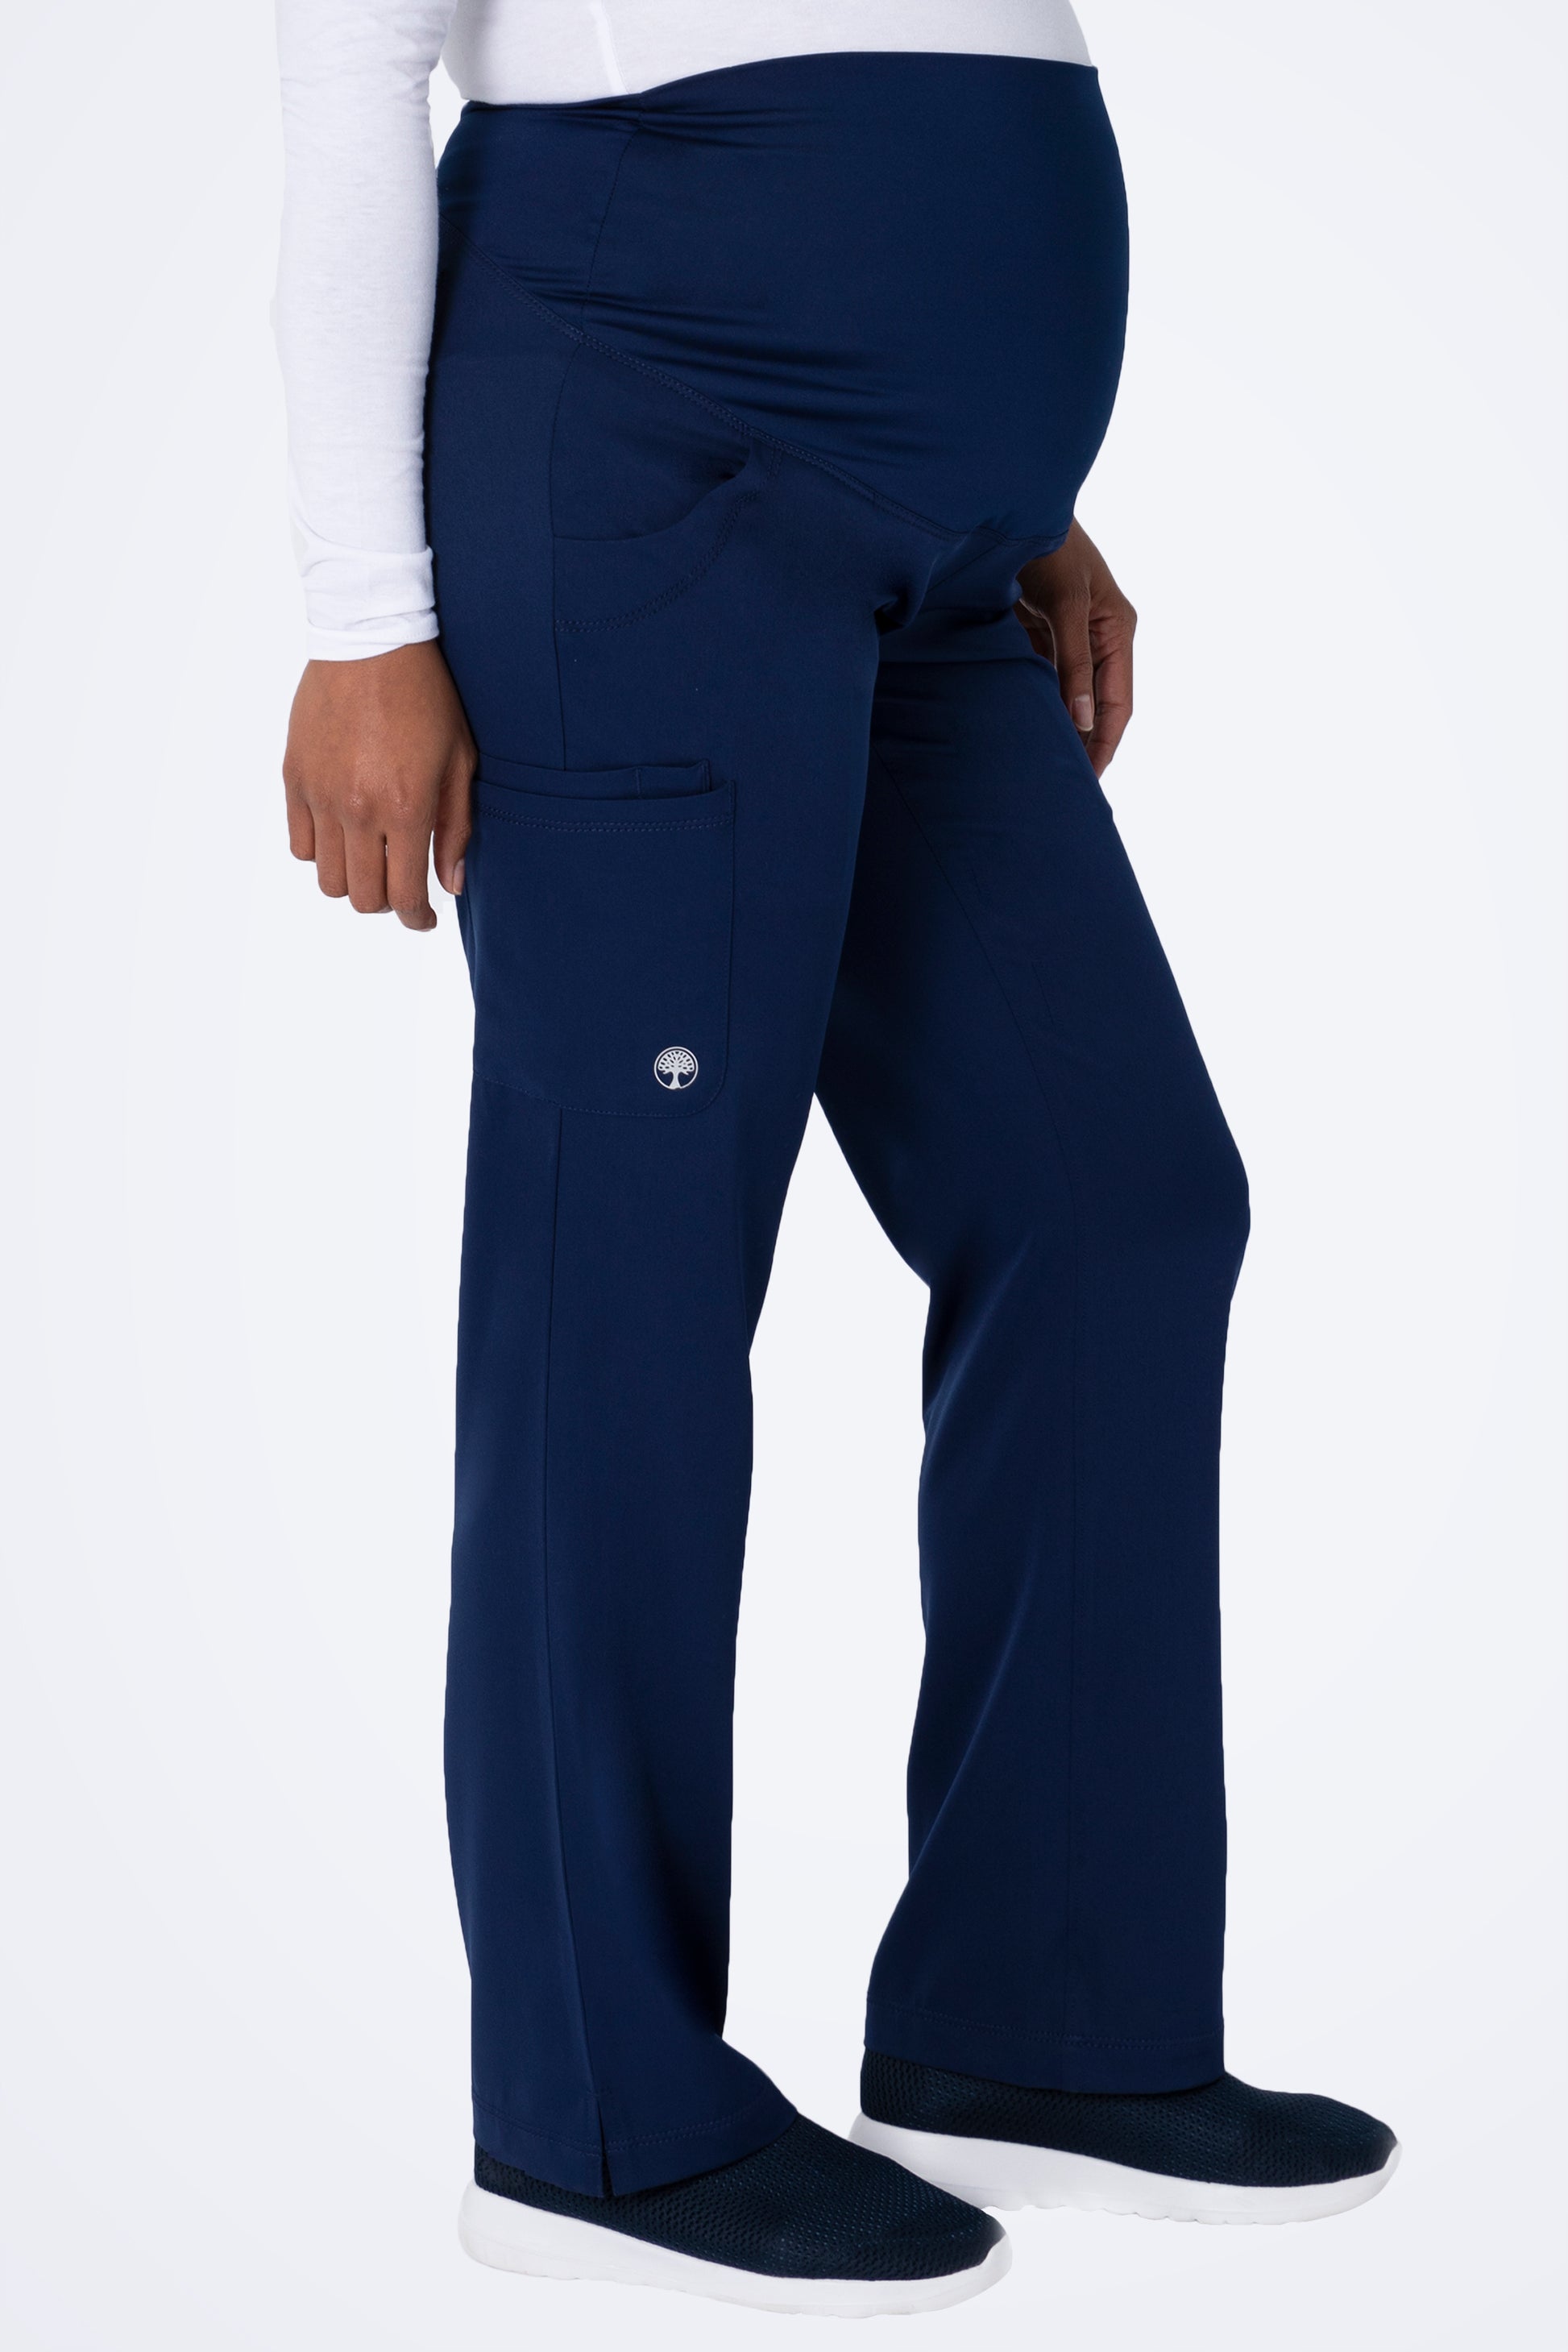 Healing Hands HHWorks 9510 Maternity Pant Navy Right 